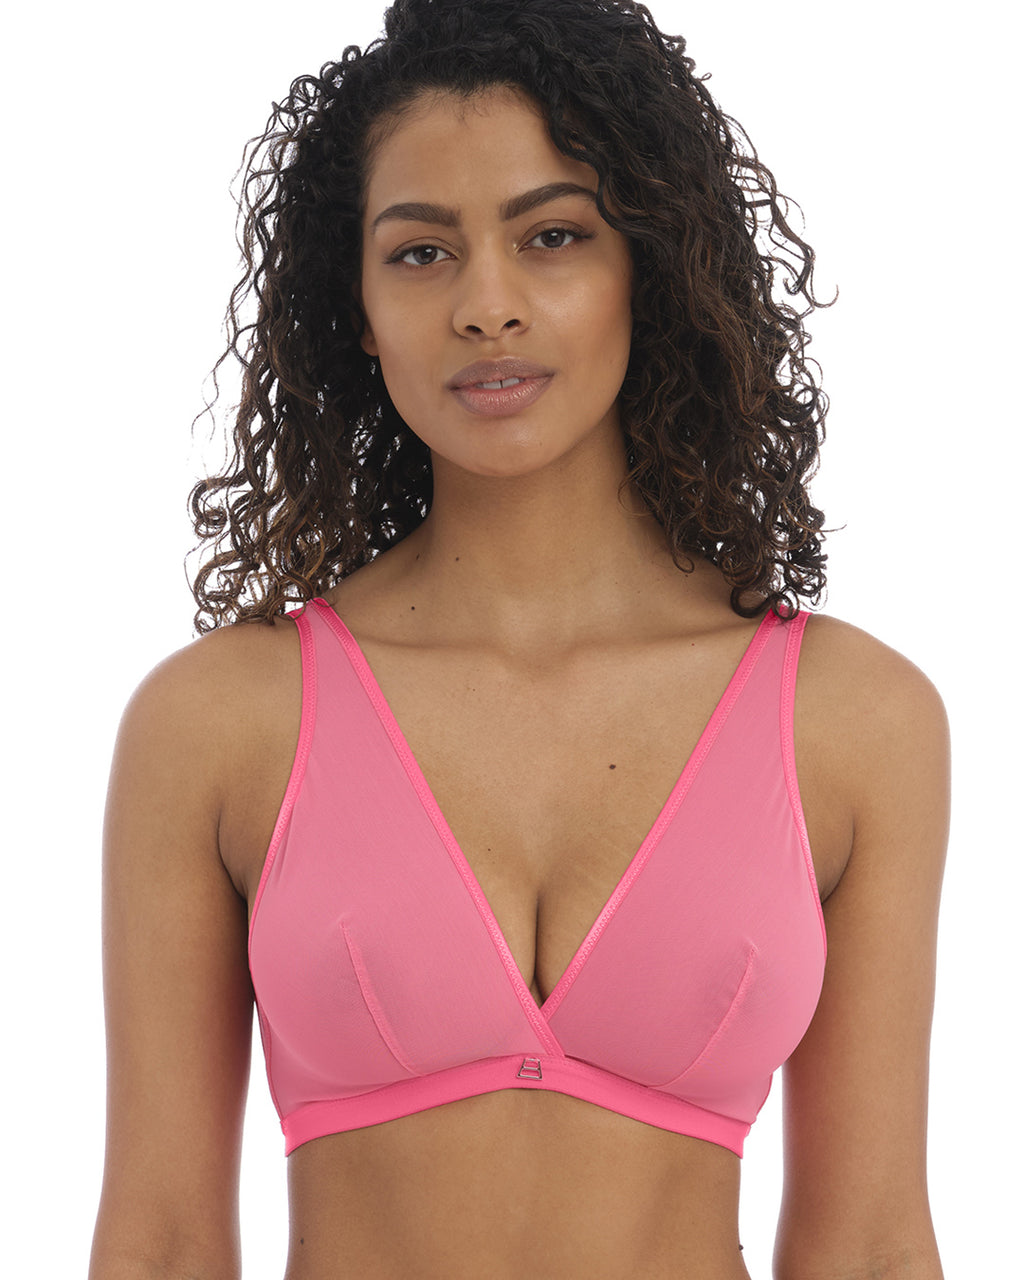 Wired Bras, Florale, Florale Mudan Wired Non Padded Visual Minimizing Bra